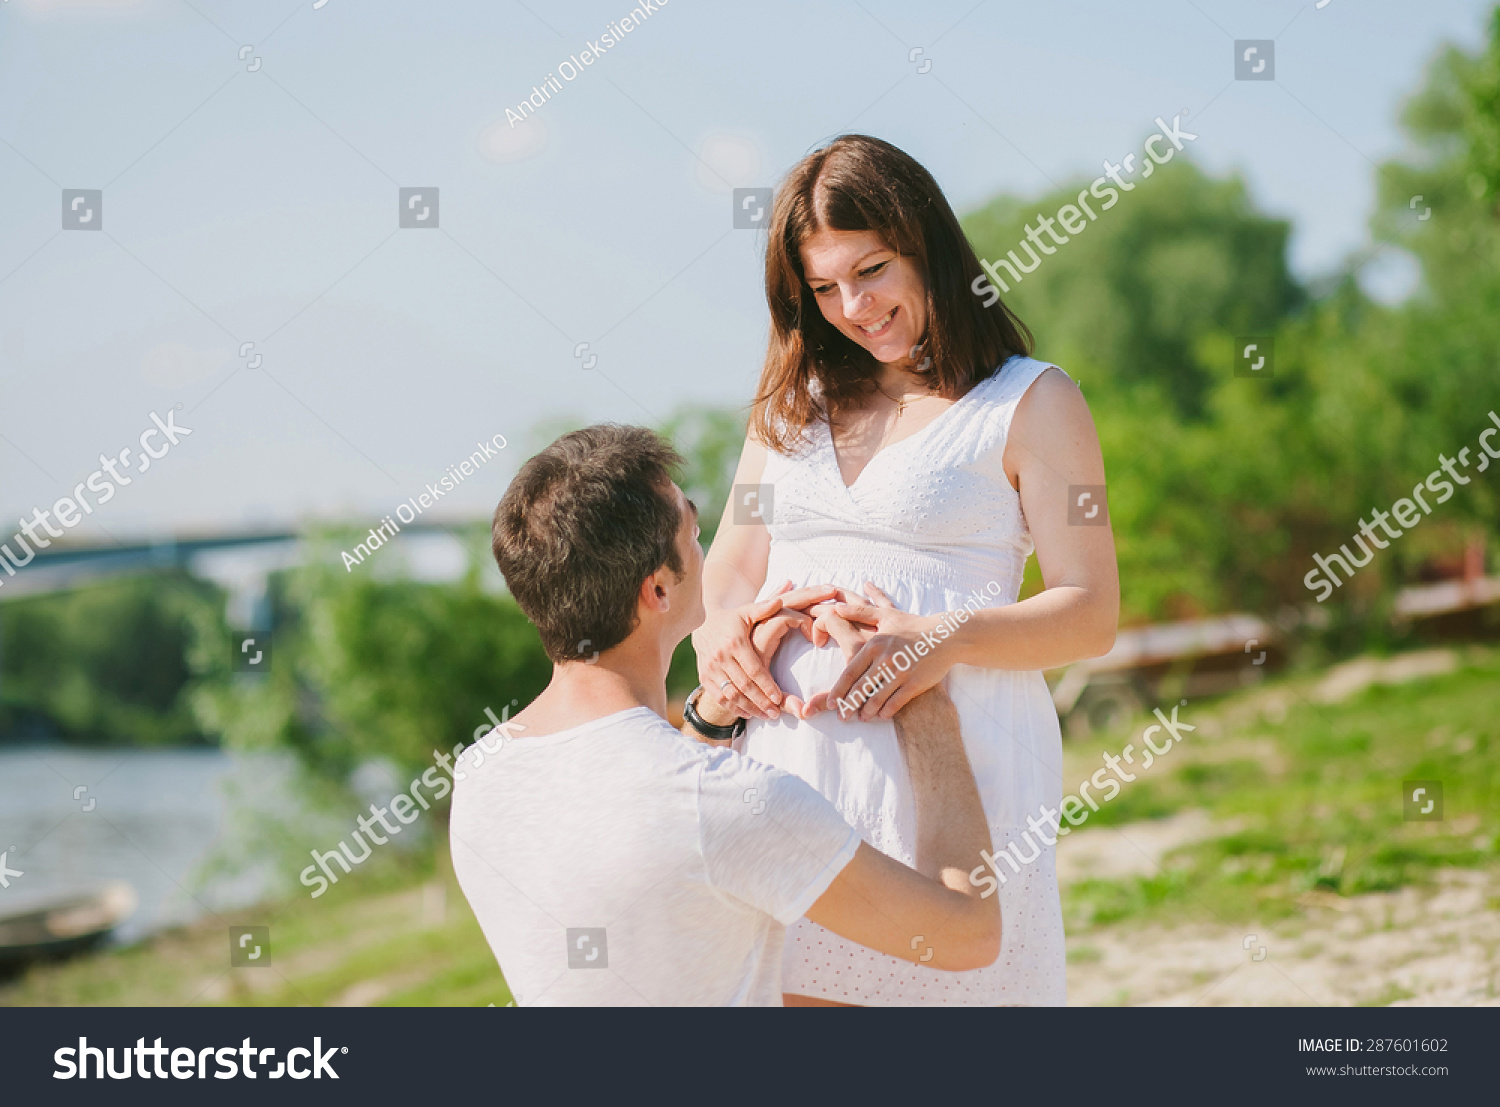 Pregnant Family. Love Concept. Husband And Wife In ...